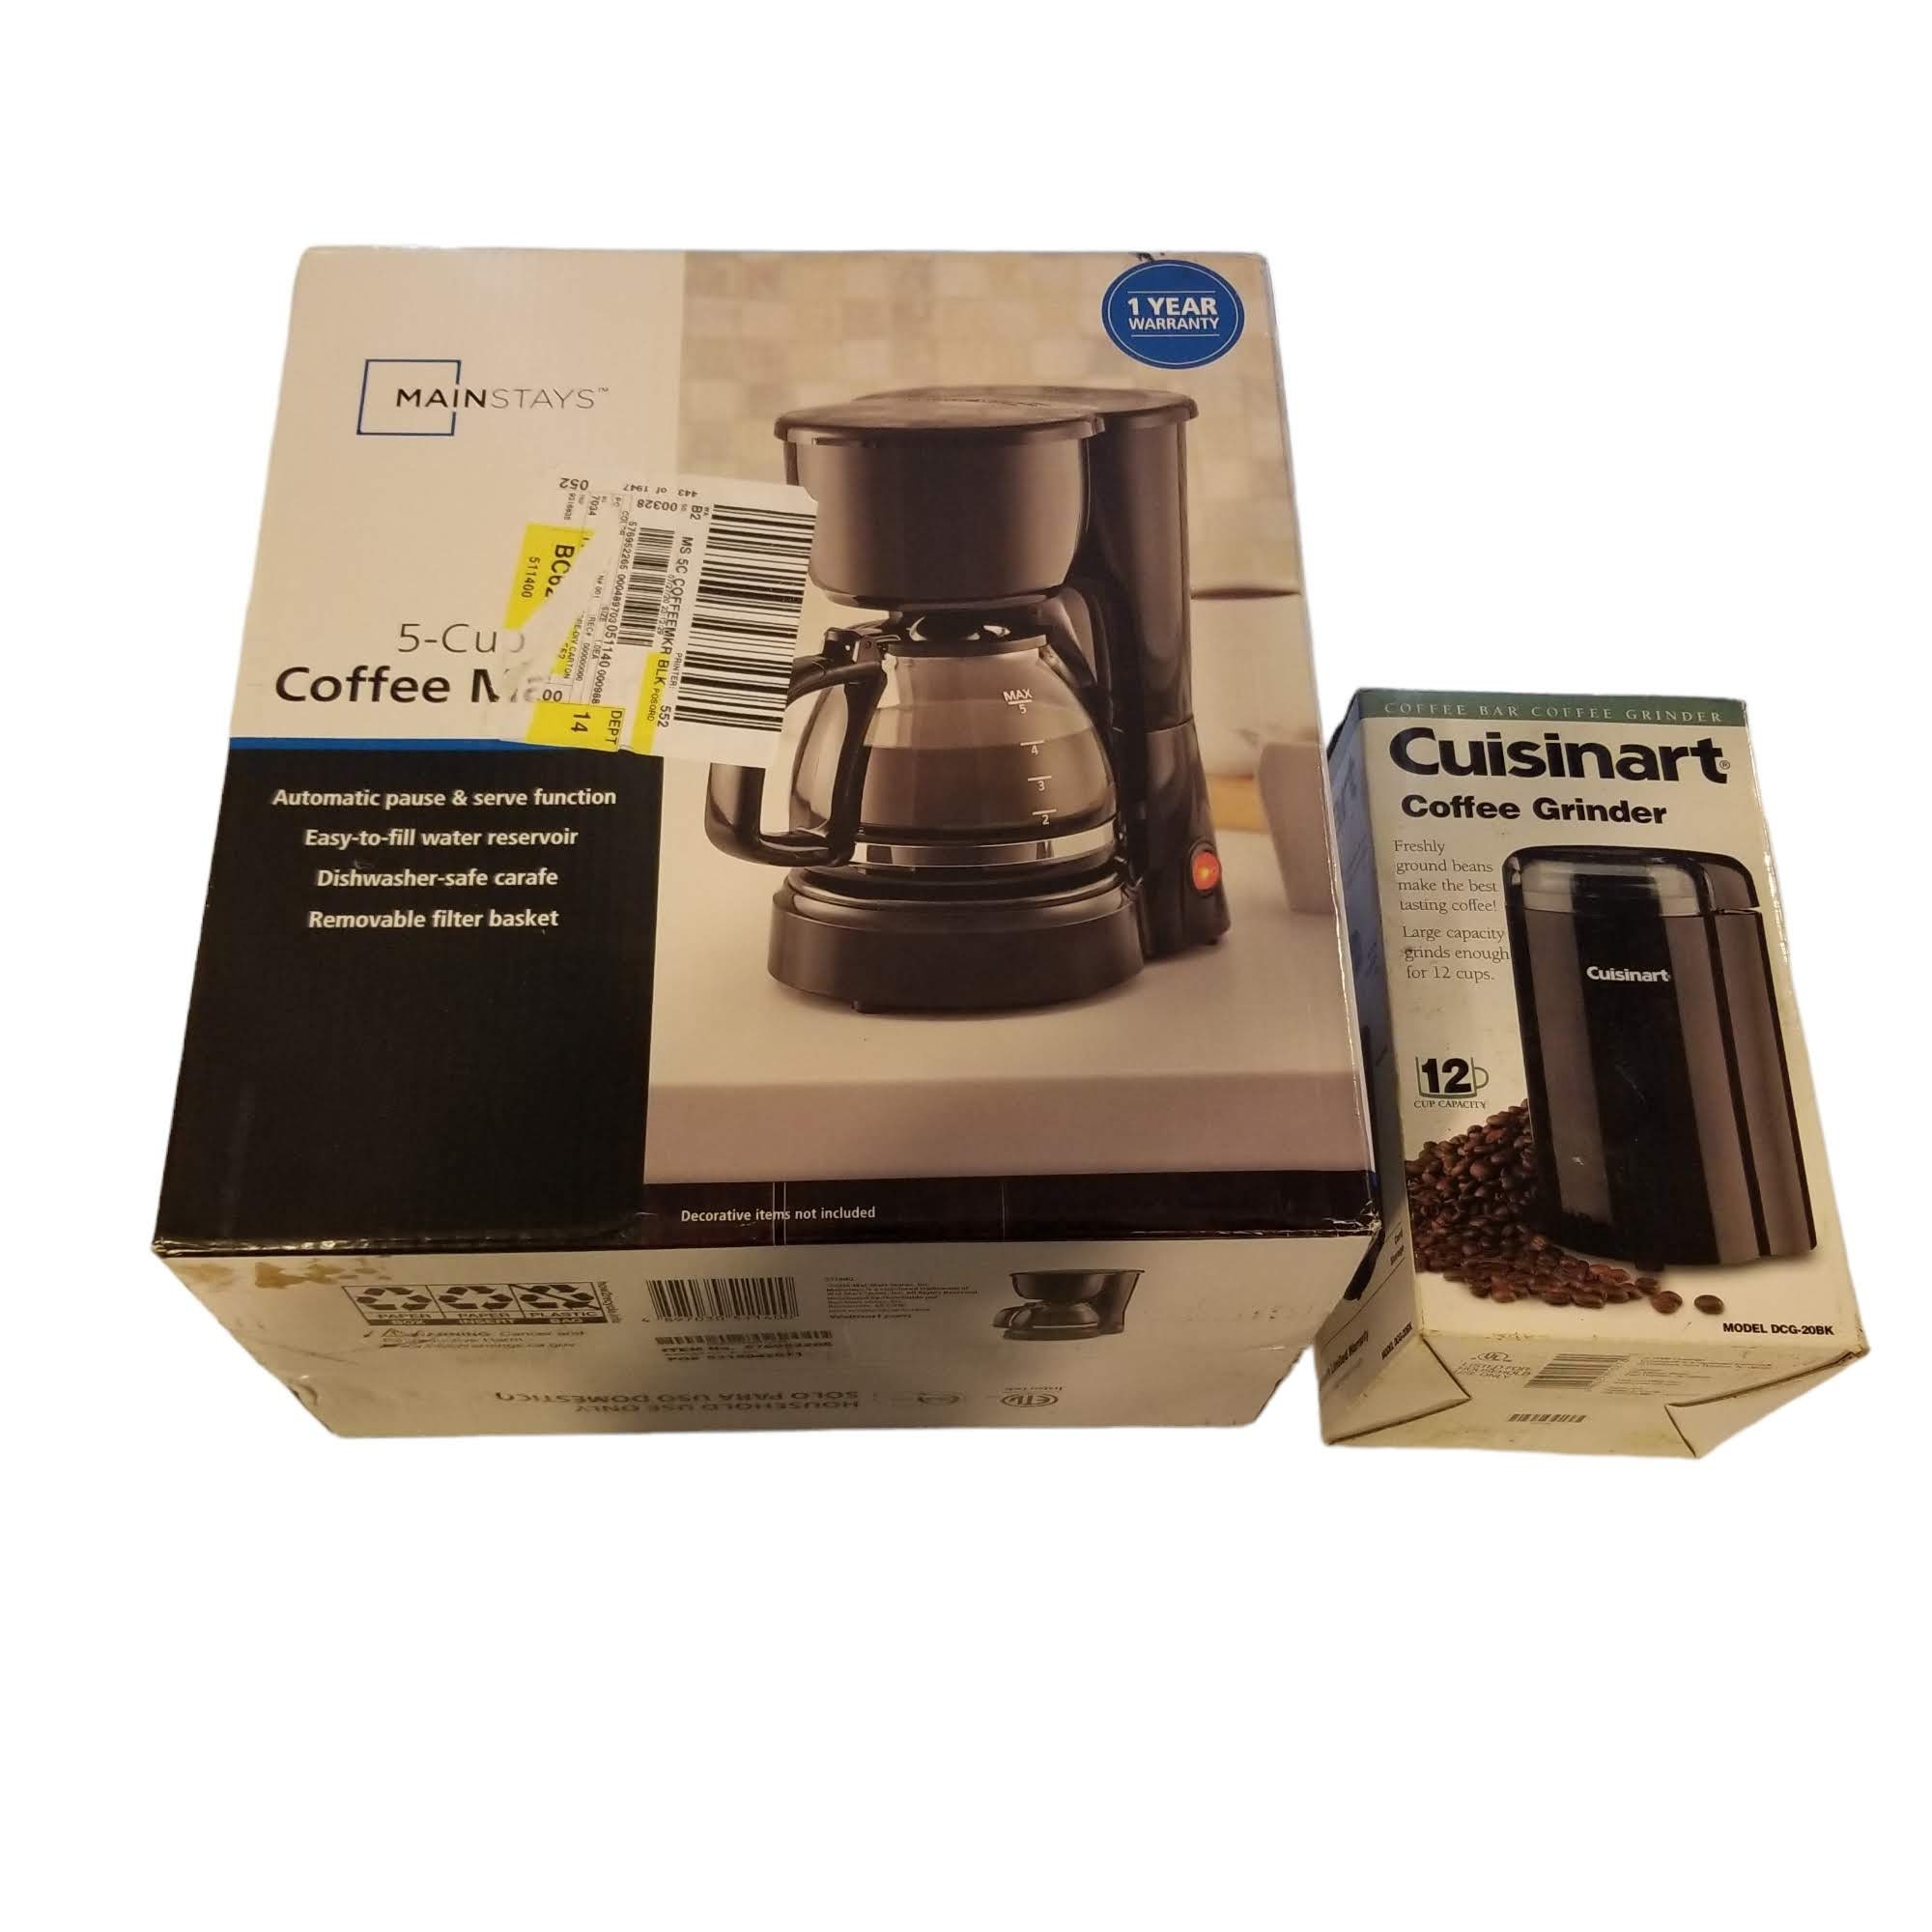 Mainstays 511400 5-Cup Coffee Maker Installation Manual